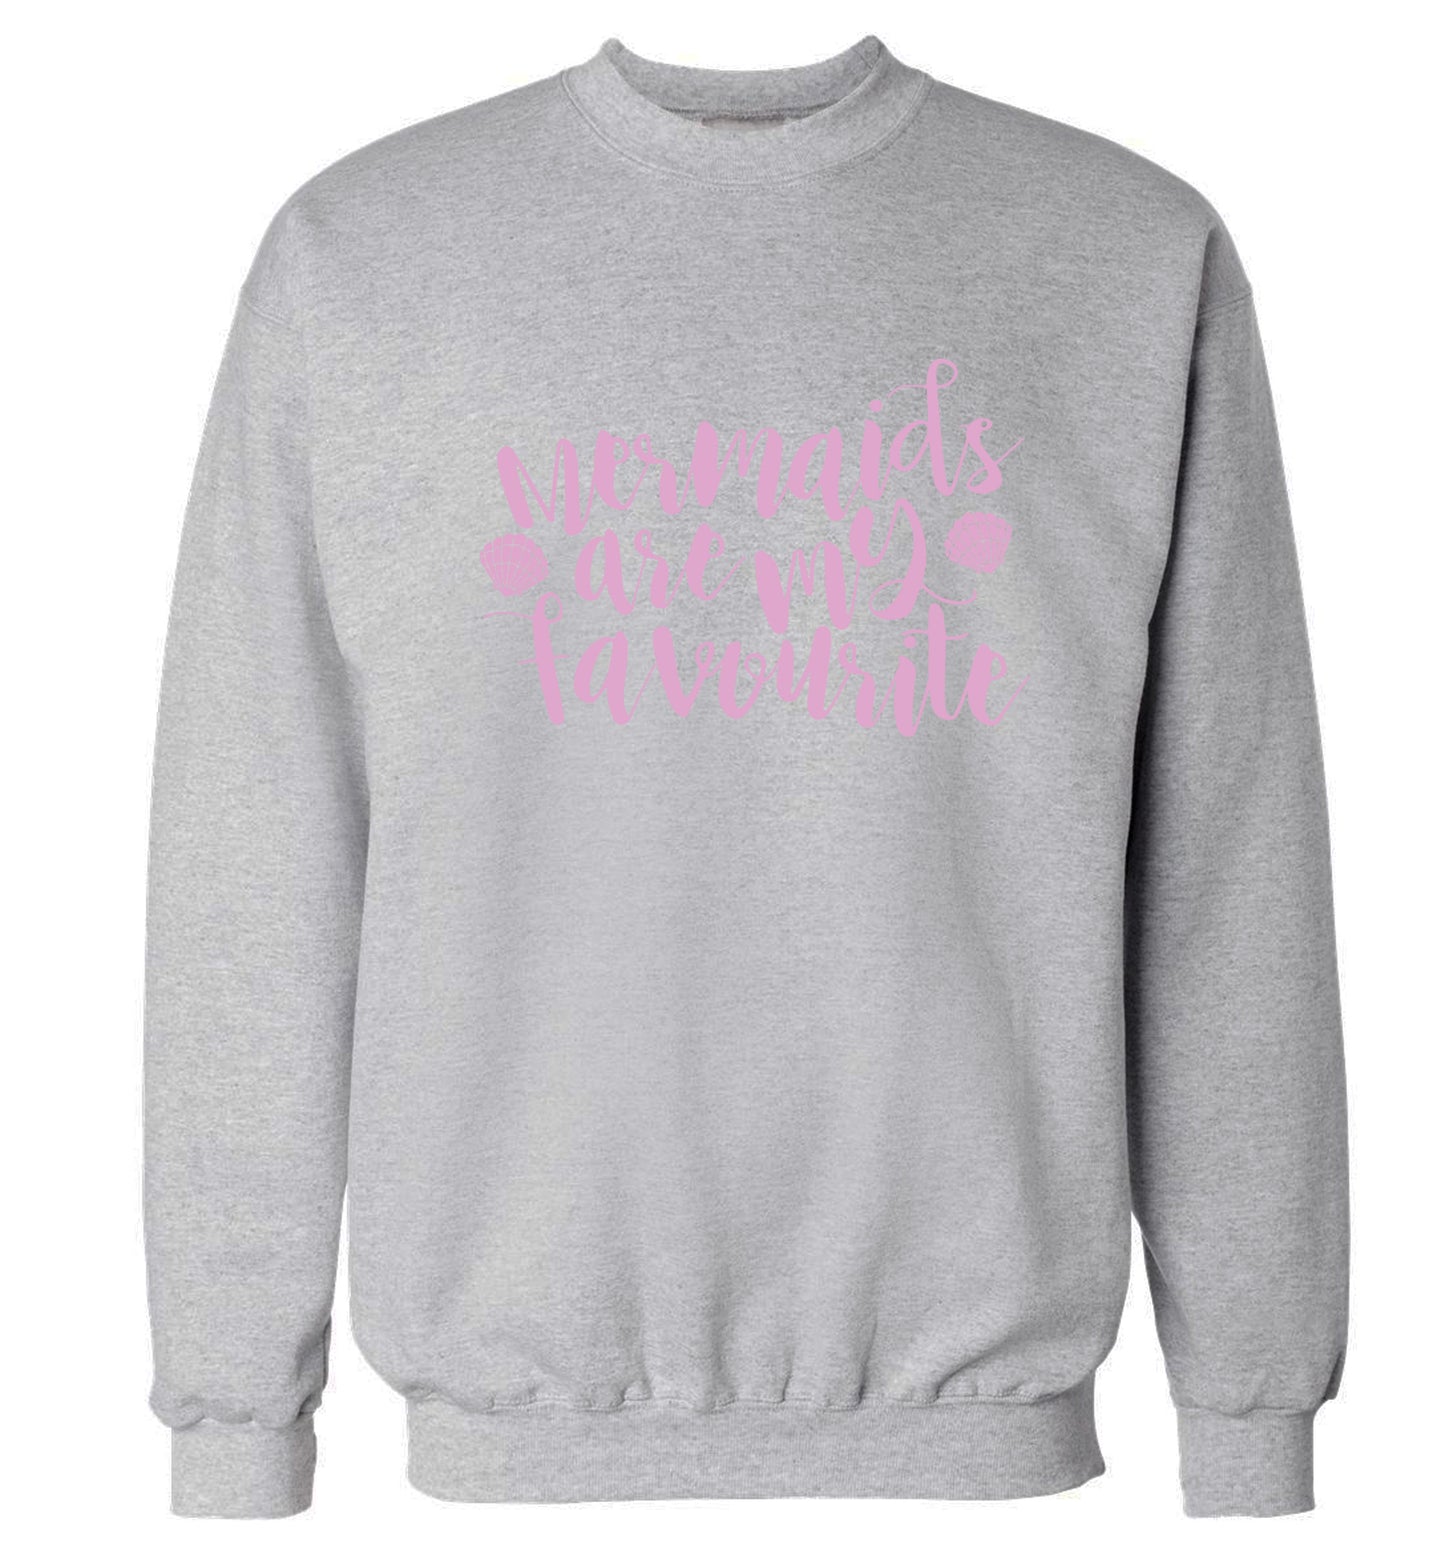 Mermaids are my favourite Adult's unisex grey Sweater 2XL